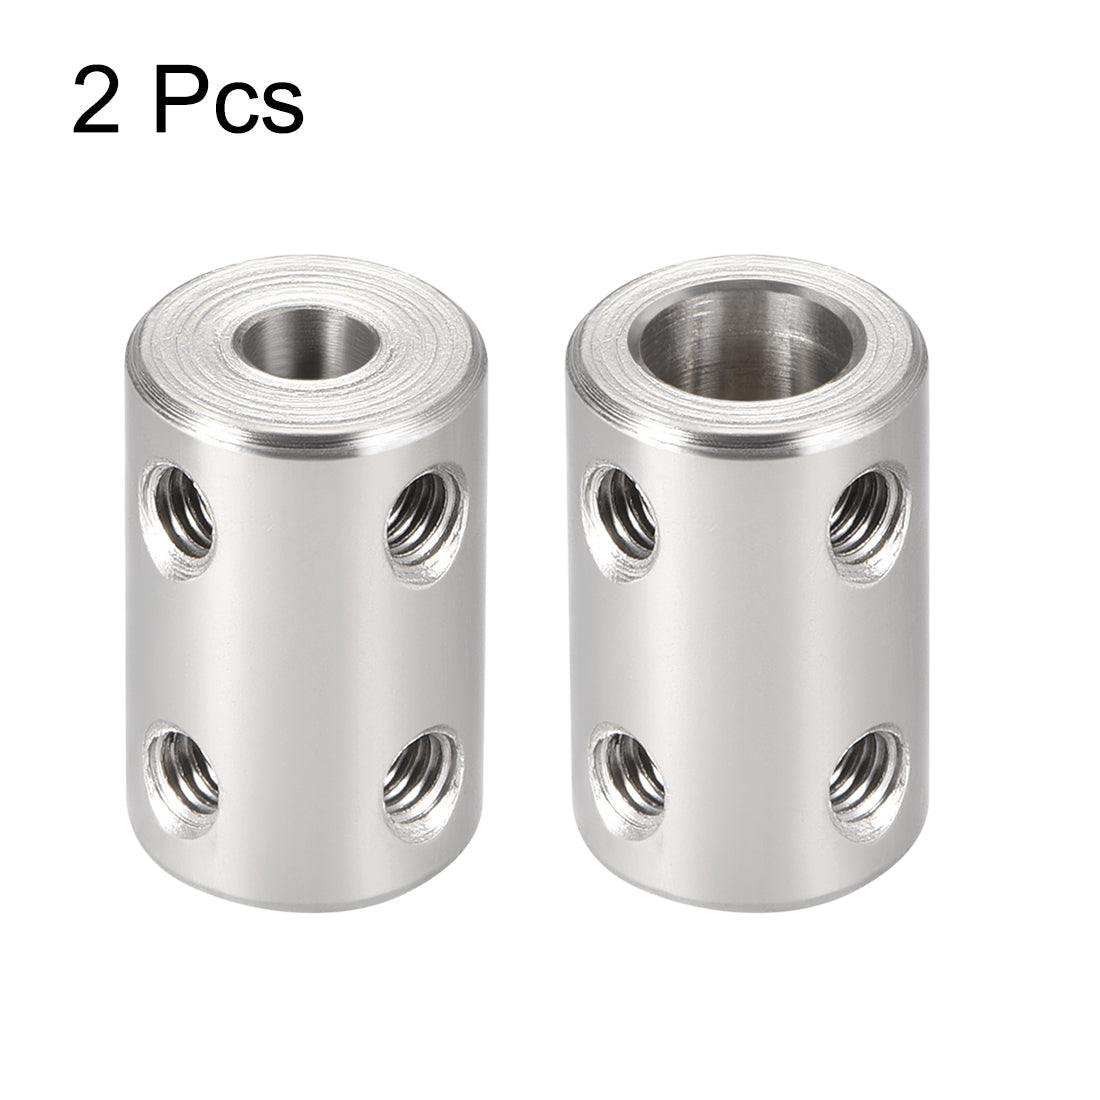 uxcell Uxcell Shaft Coupling 5mm to 8mm Bore L22xD14 Robot Motor Wheel Rigid Coupler Connector Silver Tone 2 PCS